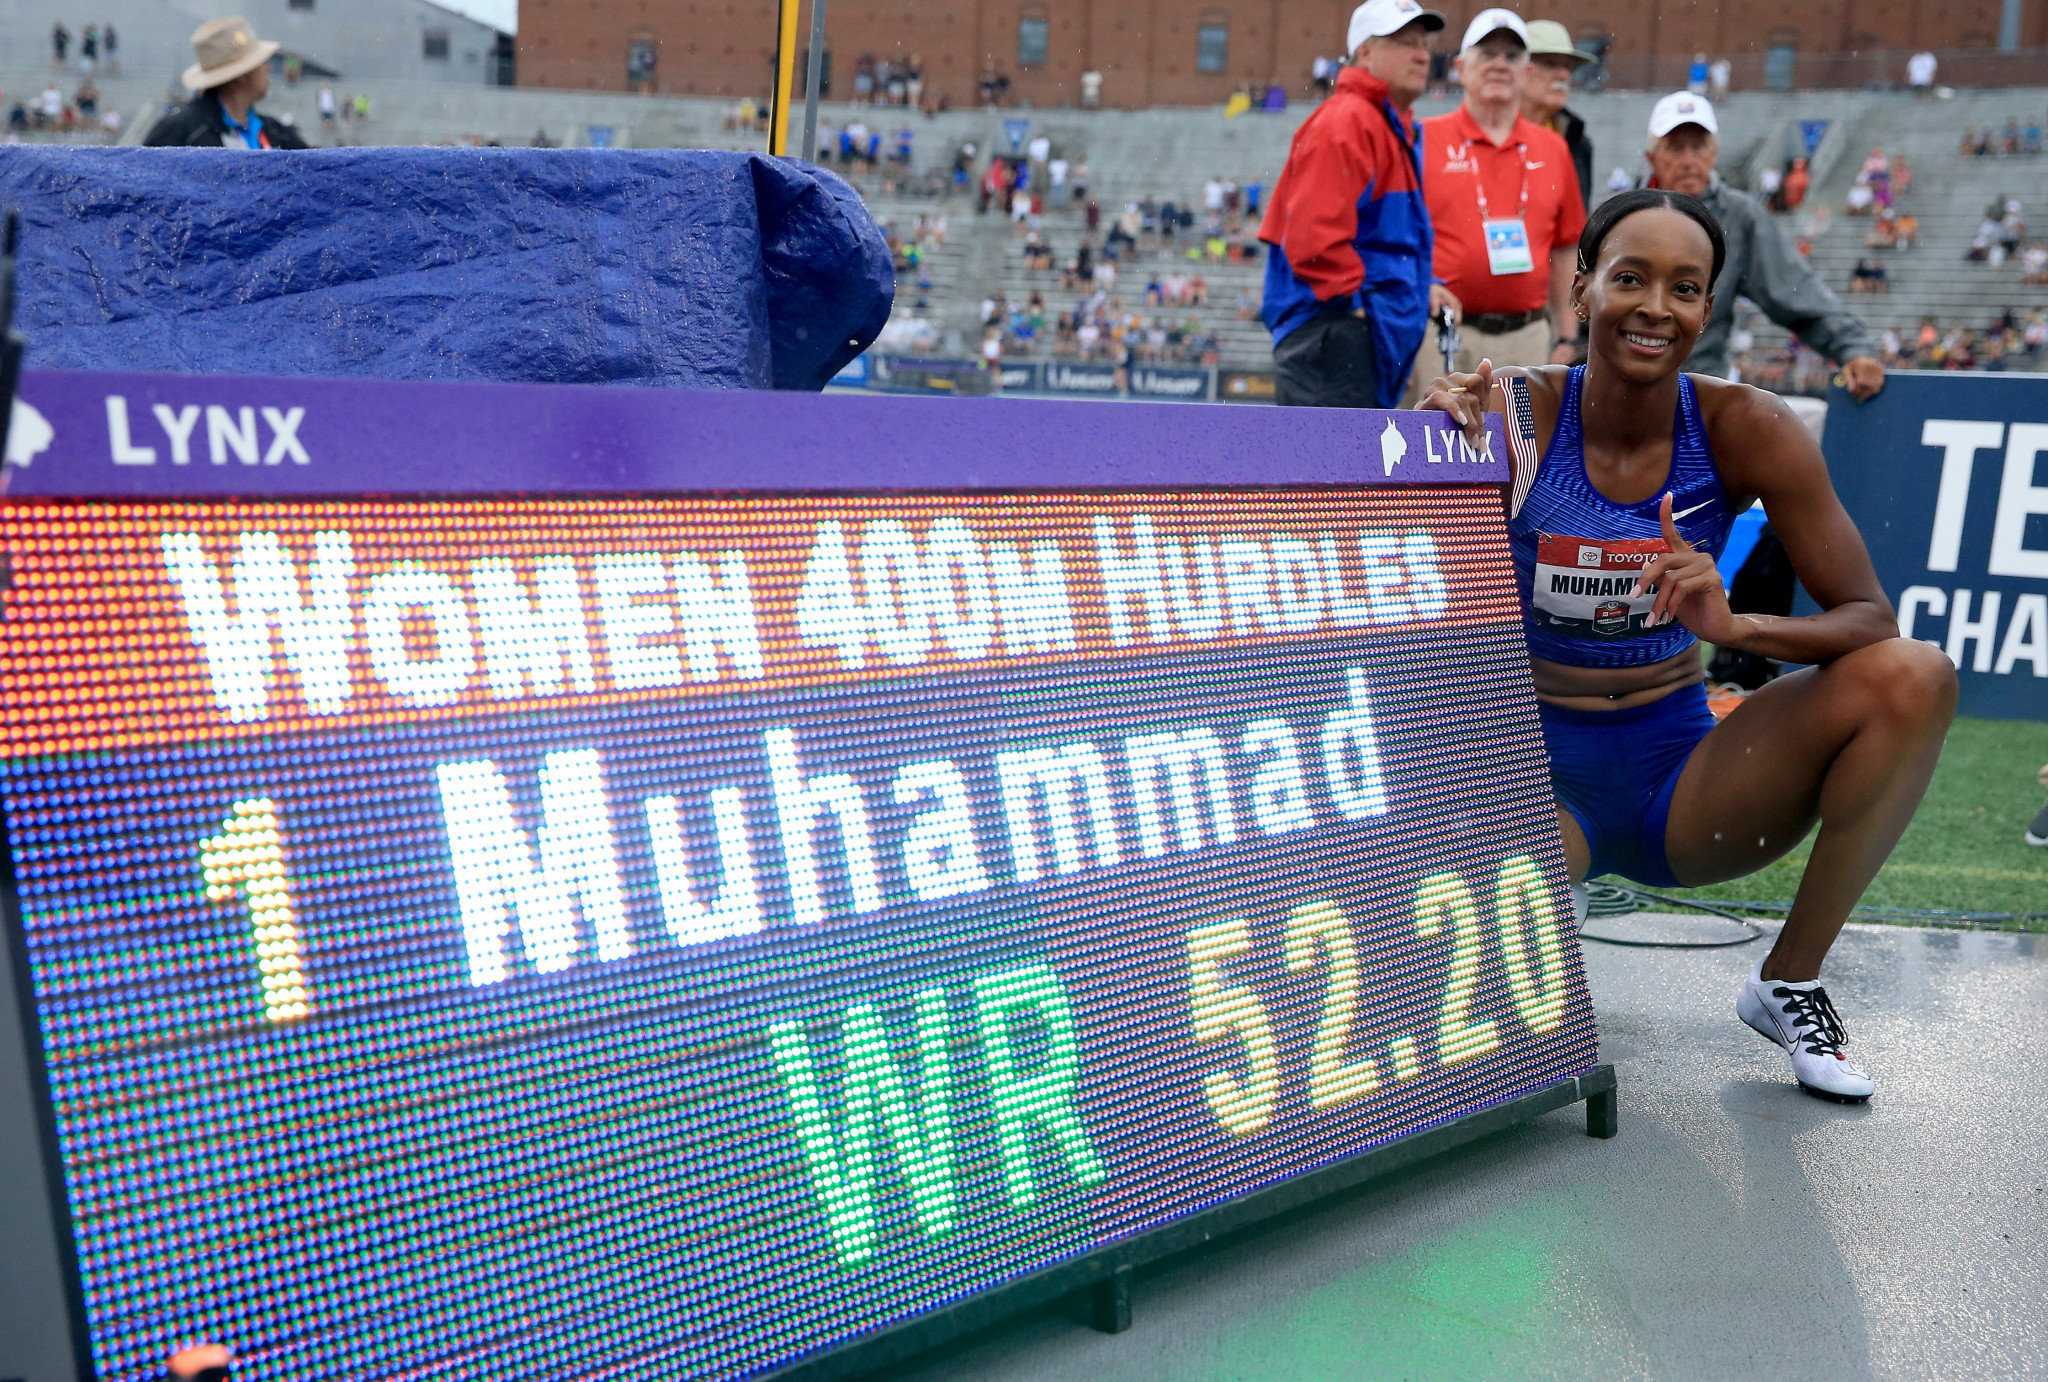 Dalilah Muhammad poses with the clock after setting the world record in the 400 meter hurdles during the 2019 United States of America Track and Field Outdoor Championships ©Getty Images